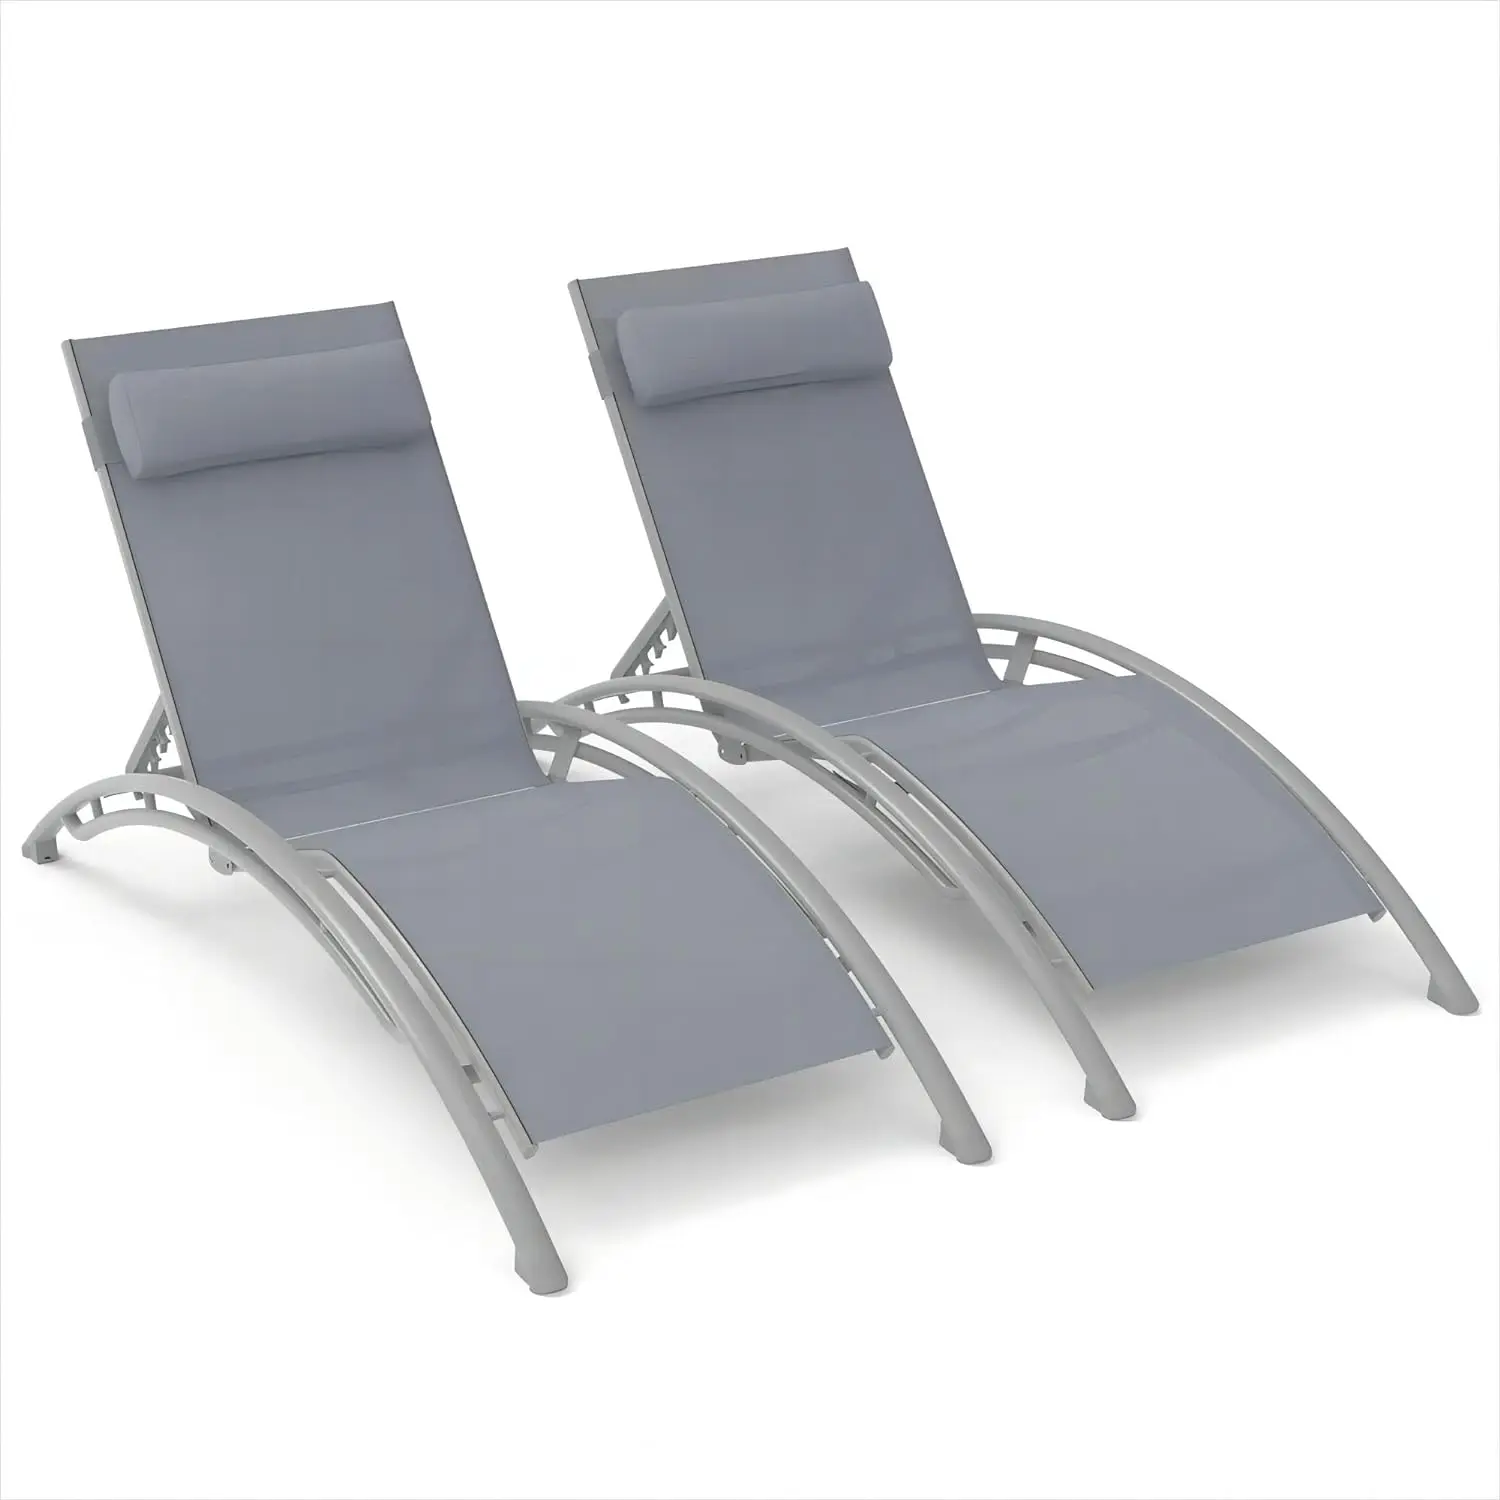 

Outdoor Chaise Lounge Set of 2, Aluminium Frame Patio Recliner Chairs with Adjustable Backrest and Removable Pillow